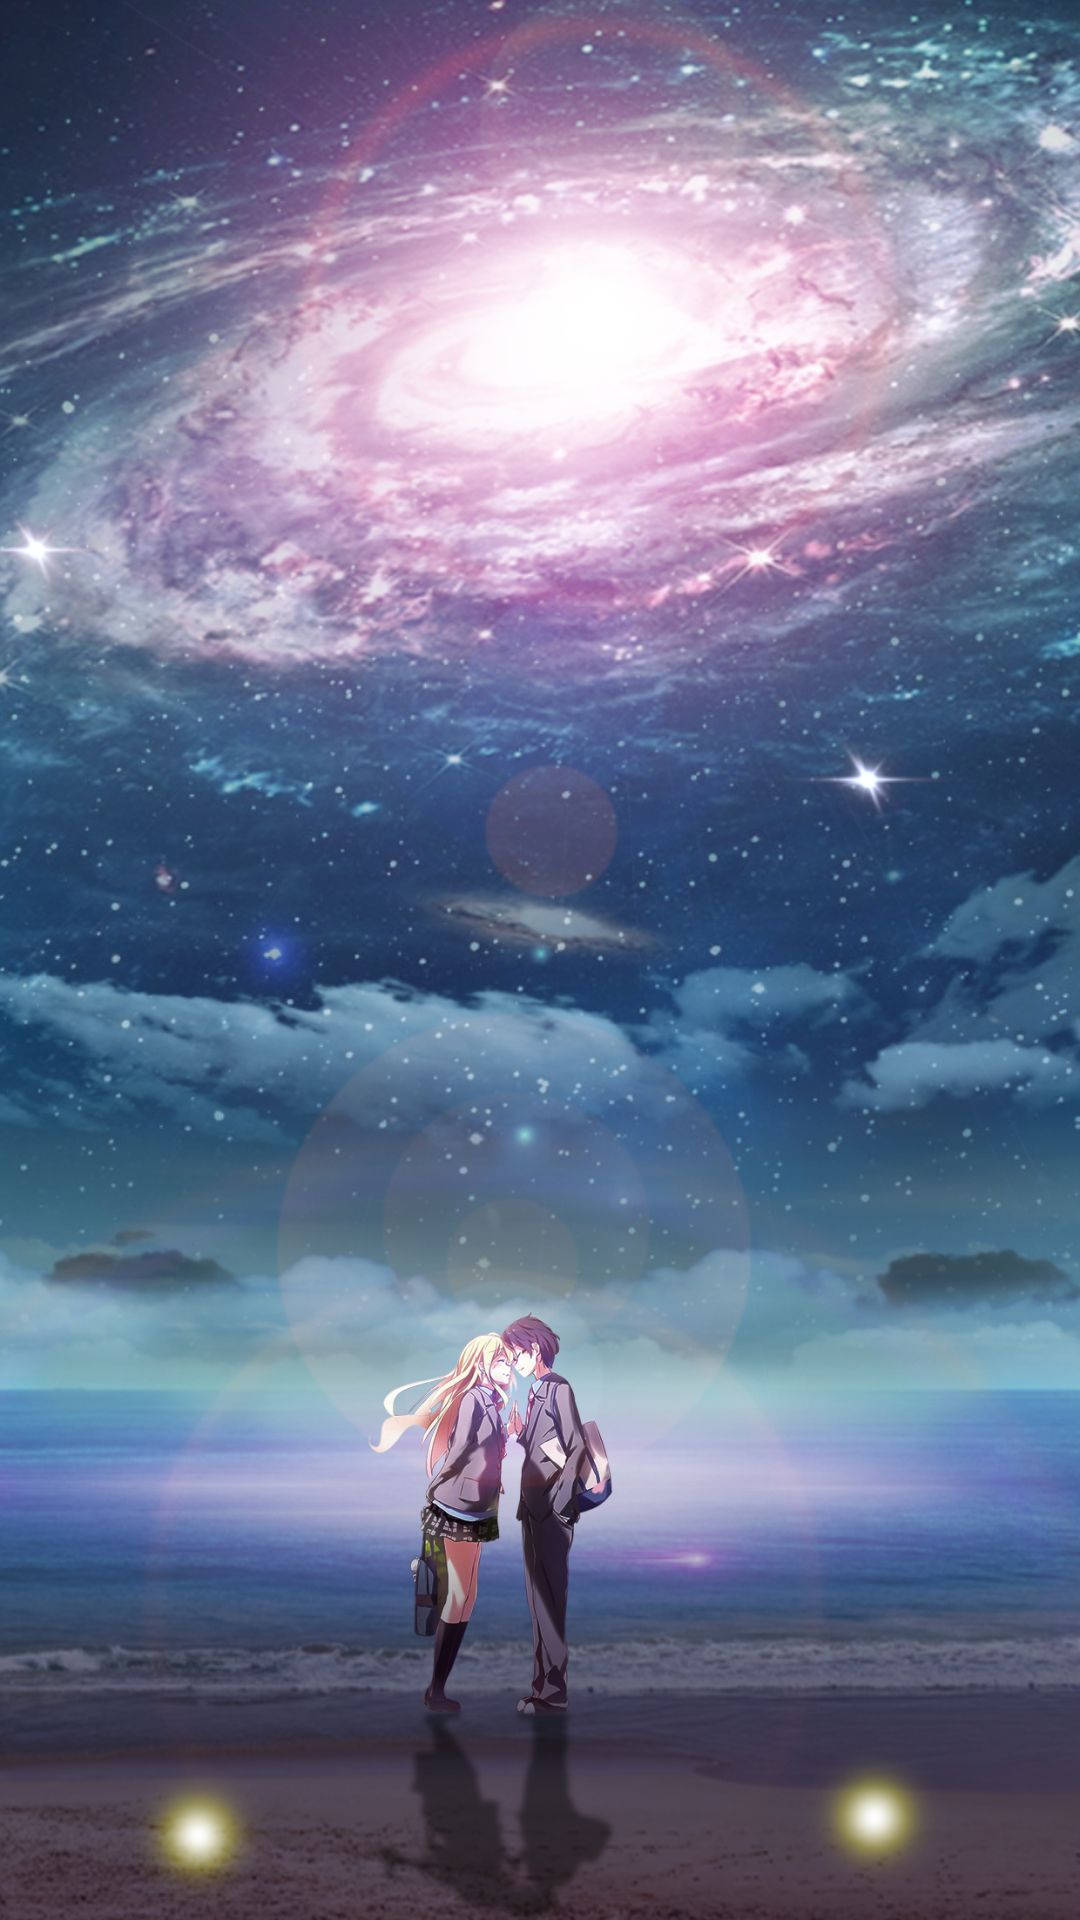 Soft and tranquil beauty of a Galaxy seen in Your Lie In April Wallpaper